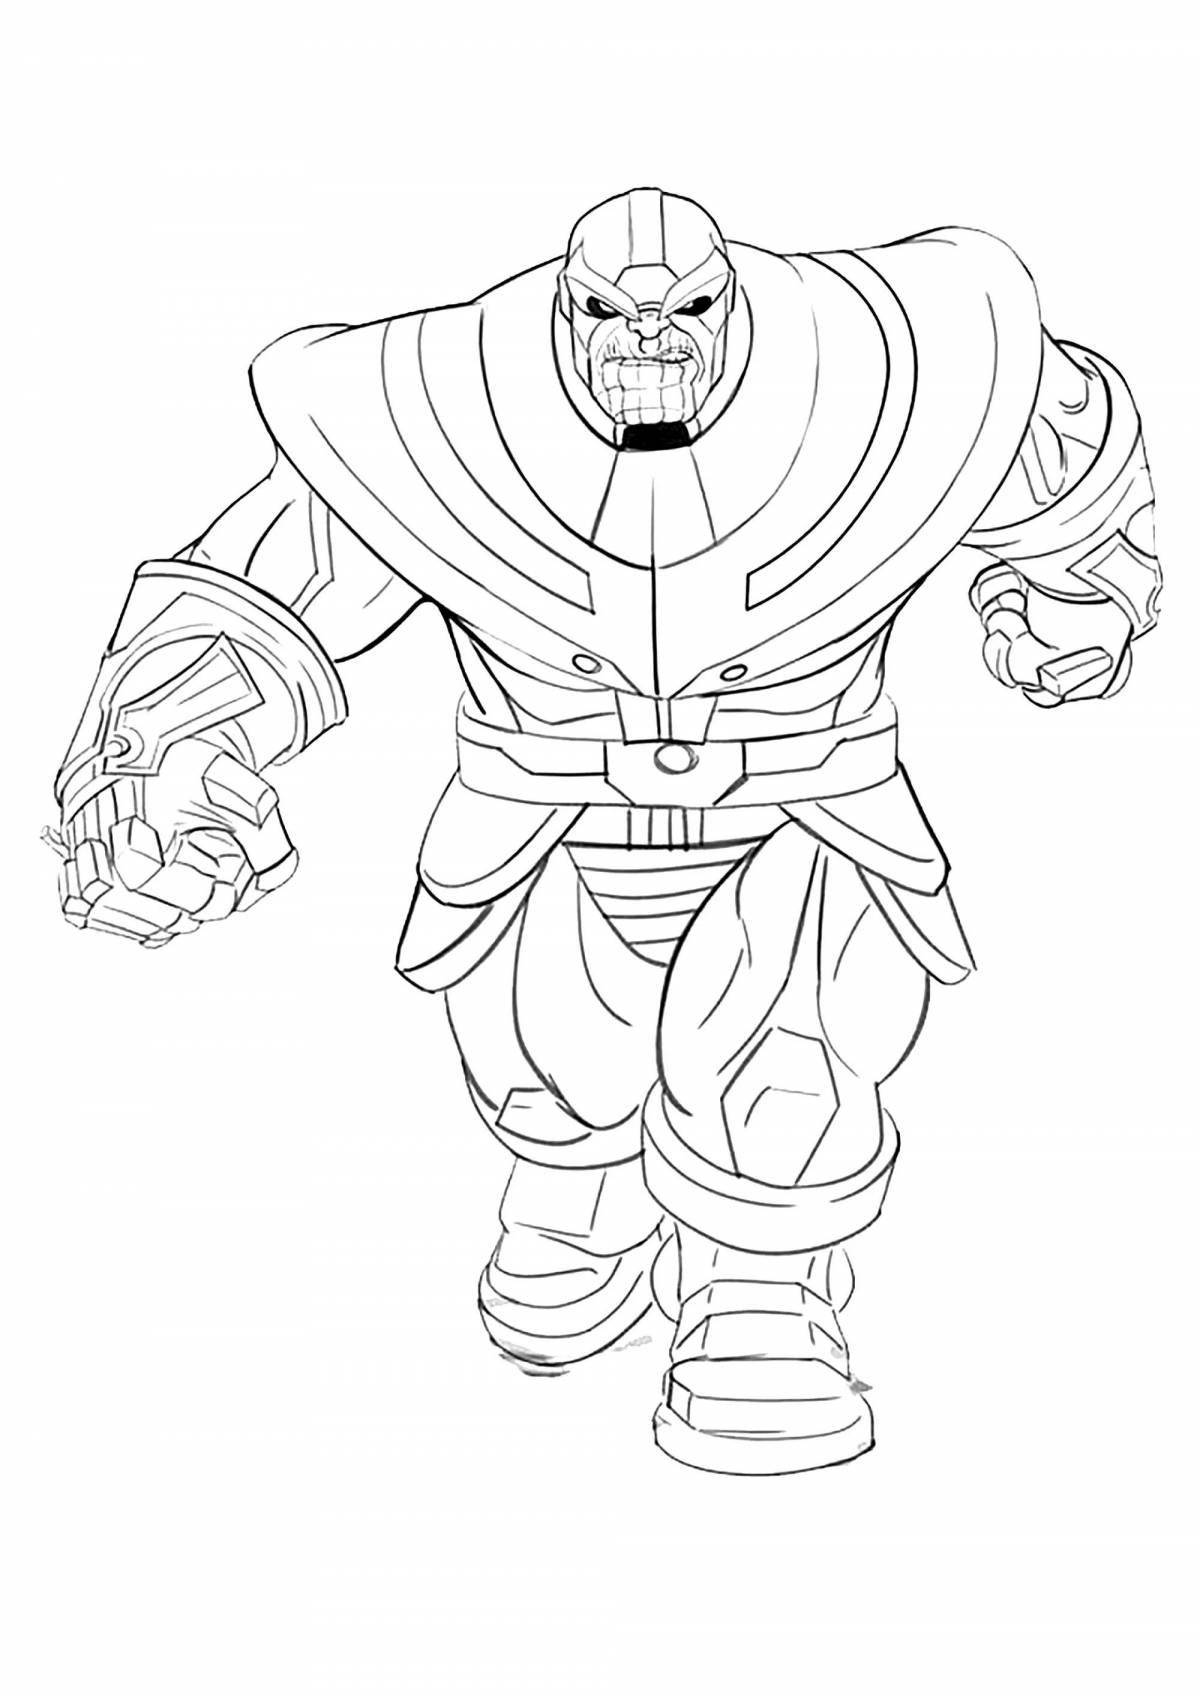 Amazing Thanos and Hulk coloring book